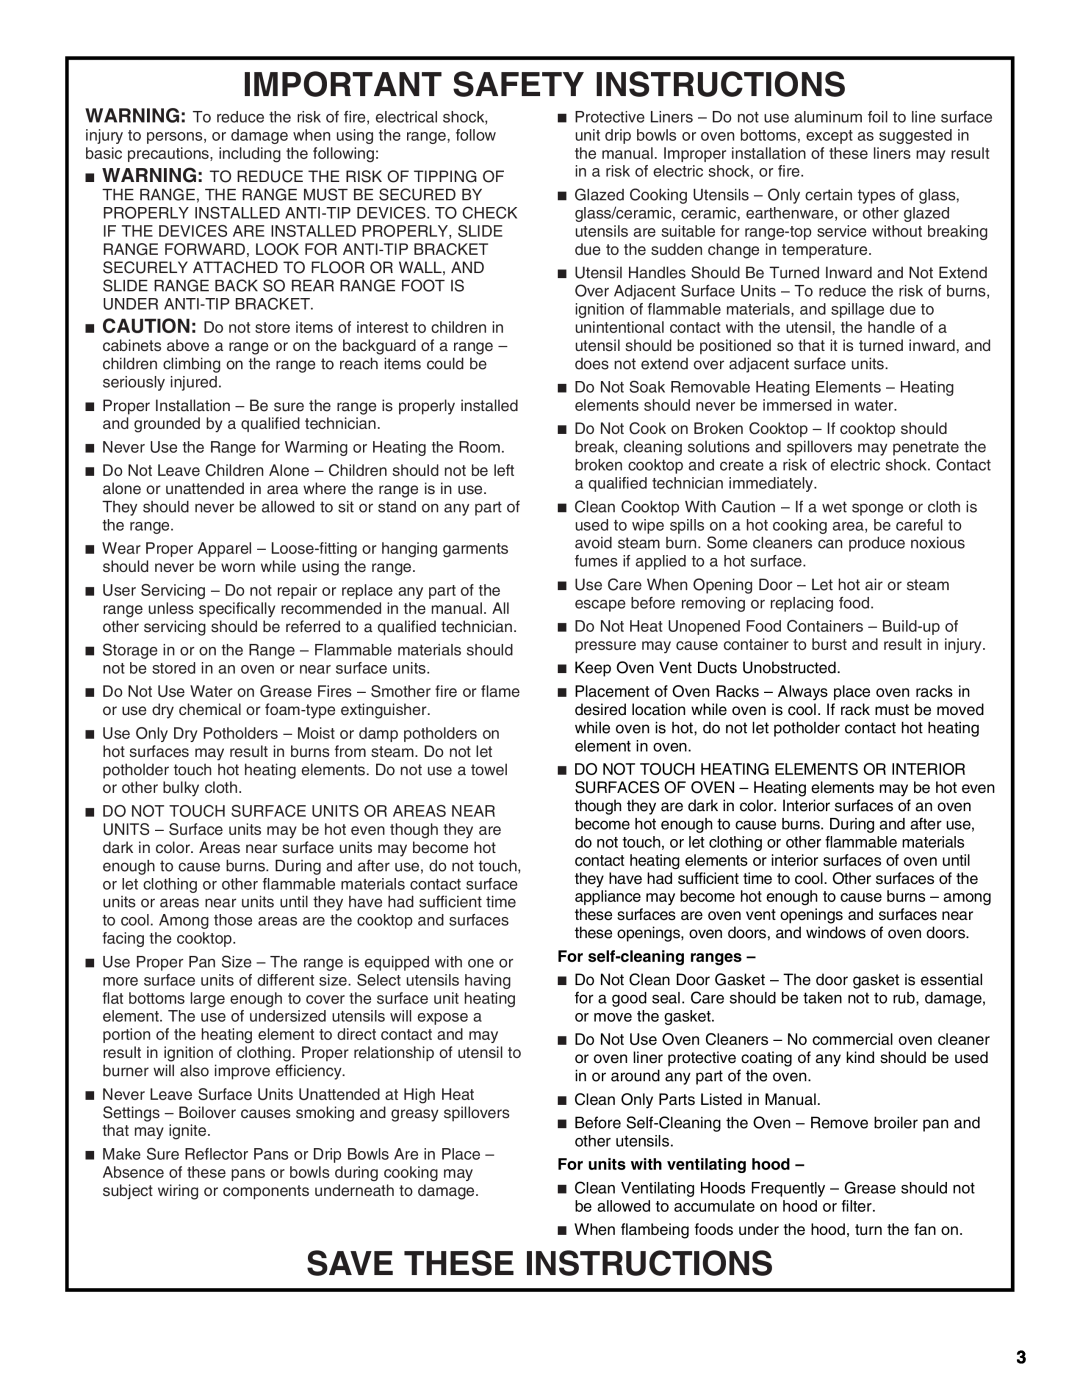 Maytag W10392923C warranty Important Safety Instructions, Save These Instructions, For self-cleaning ranges 